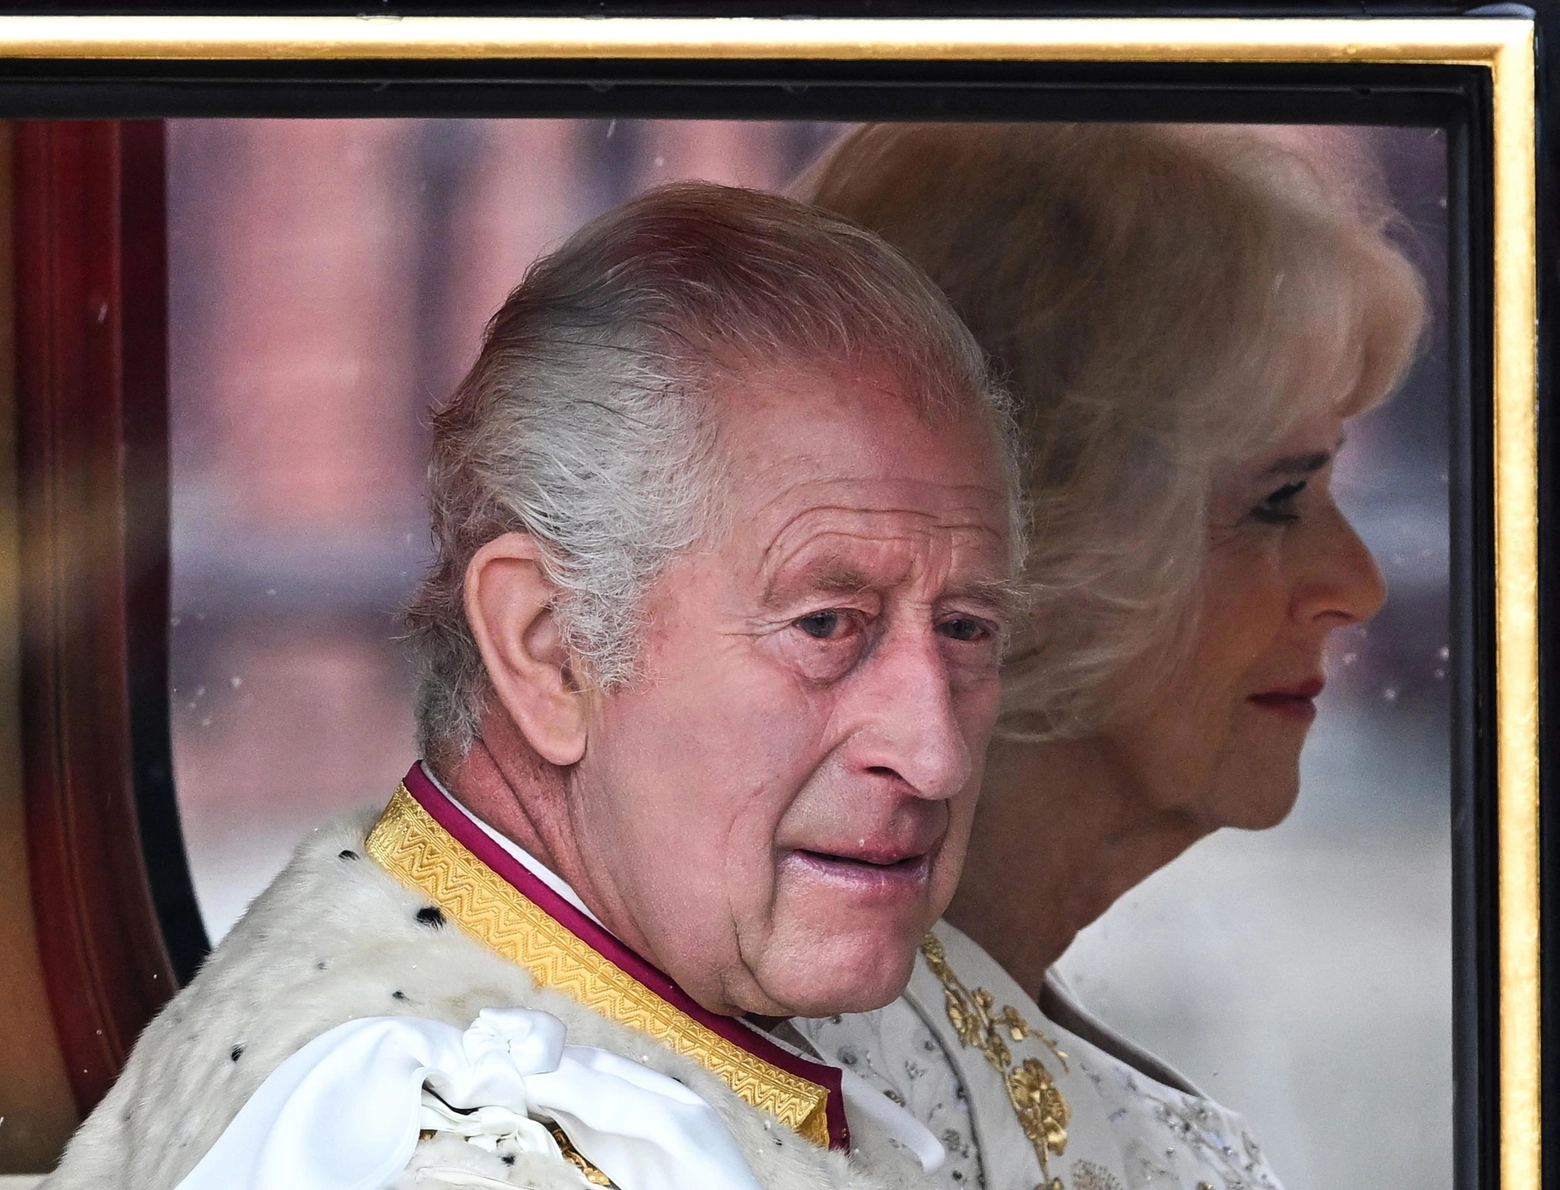 Britain's King Charles III and Britain's Camilla, Queen Consort begin their journey in the Diamond Jubilee State Coach, in the 'King's Procession', a journey of two kilometres from Buckingham Palace to Westminster Abbey in central London on May 6, 2023, ahead of their coronations. - The set-piece coronation is the first in Britain in 70 years, and only the second in history to be televised. Charles will be the 40th reigning monarch to be crowned at the central London church since King William I in 1066. Outside the UK, he is also king of 14 other Commonwealth countries, including Australia, Canada and New Zealand. Camilla, his second wife, will be crowned queen alongside him and be known as Queen Camilla after the ceremony. (Photo by Oli SCARFF / AFP)